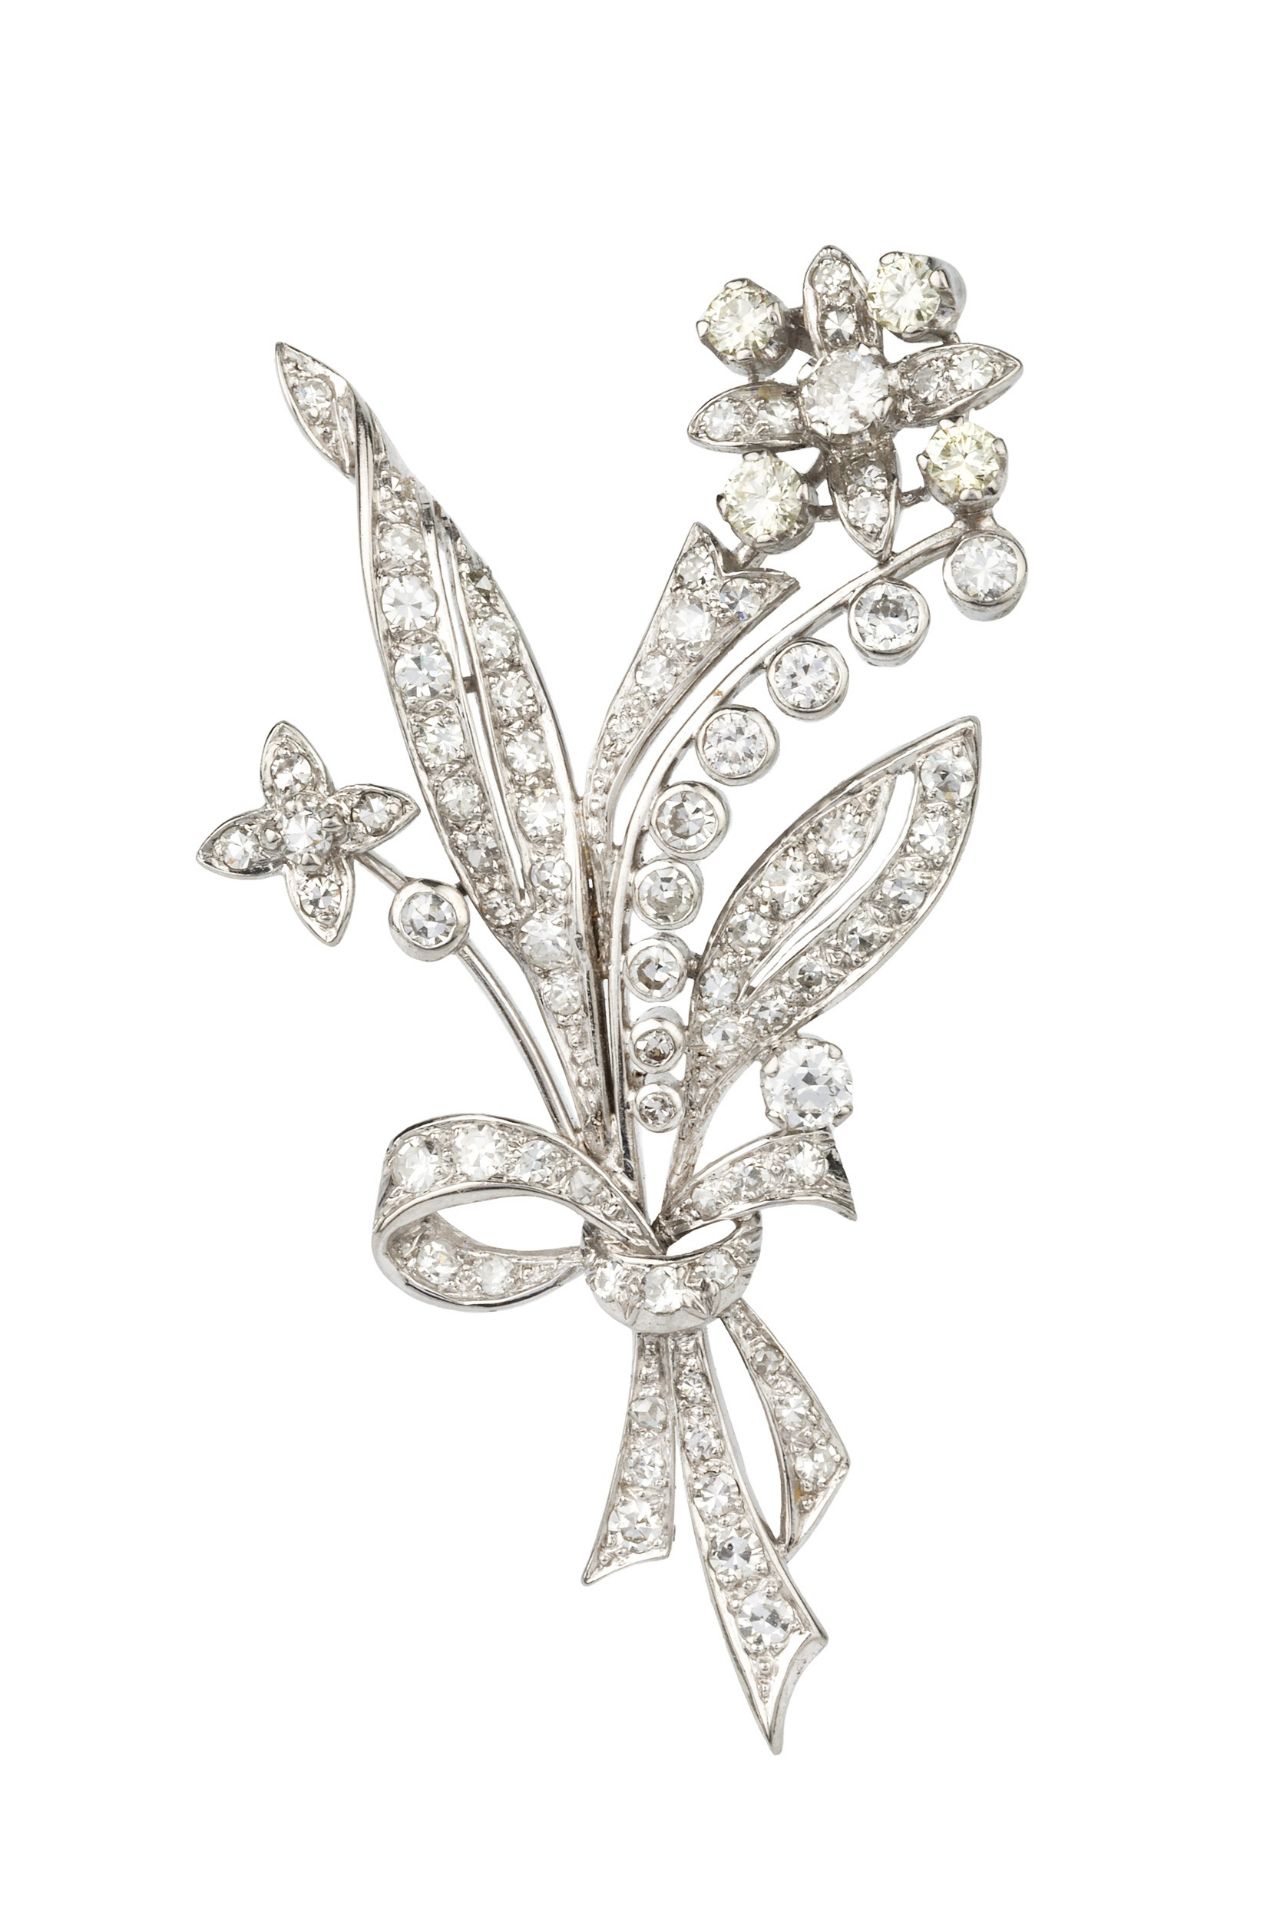 A diamond spray brooch, in the form of ribbon tied flowers and leaves, the main flower head set with